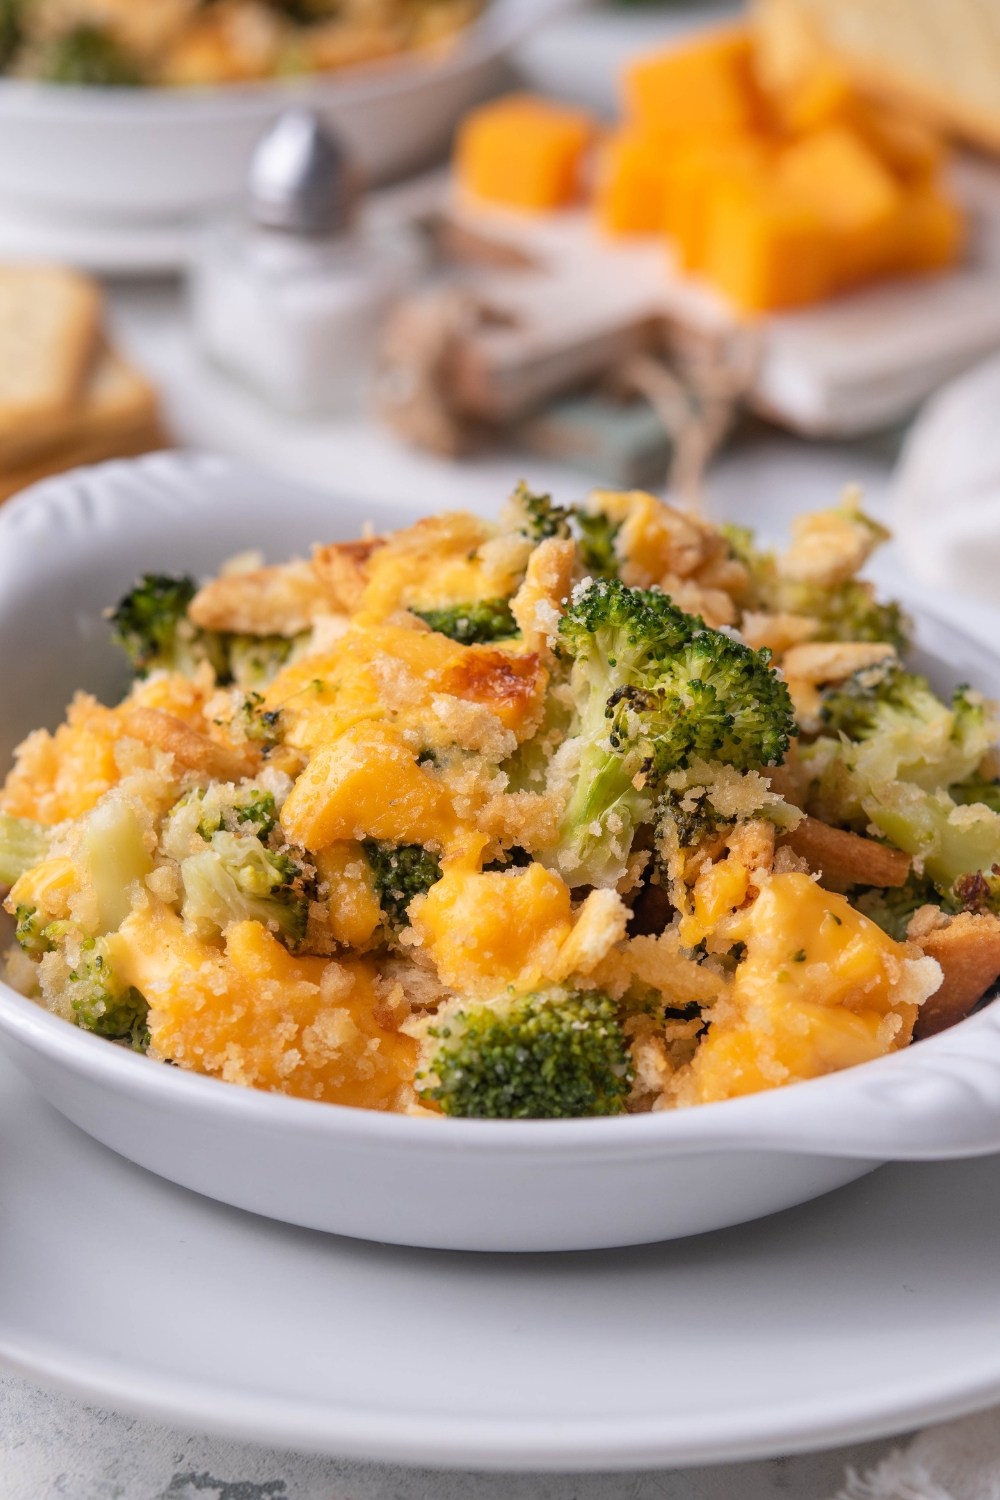 A dish containing cheddars broccoli cheese casserole.